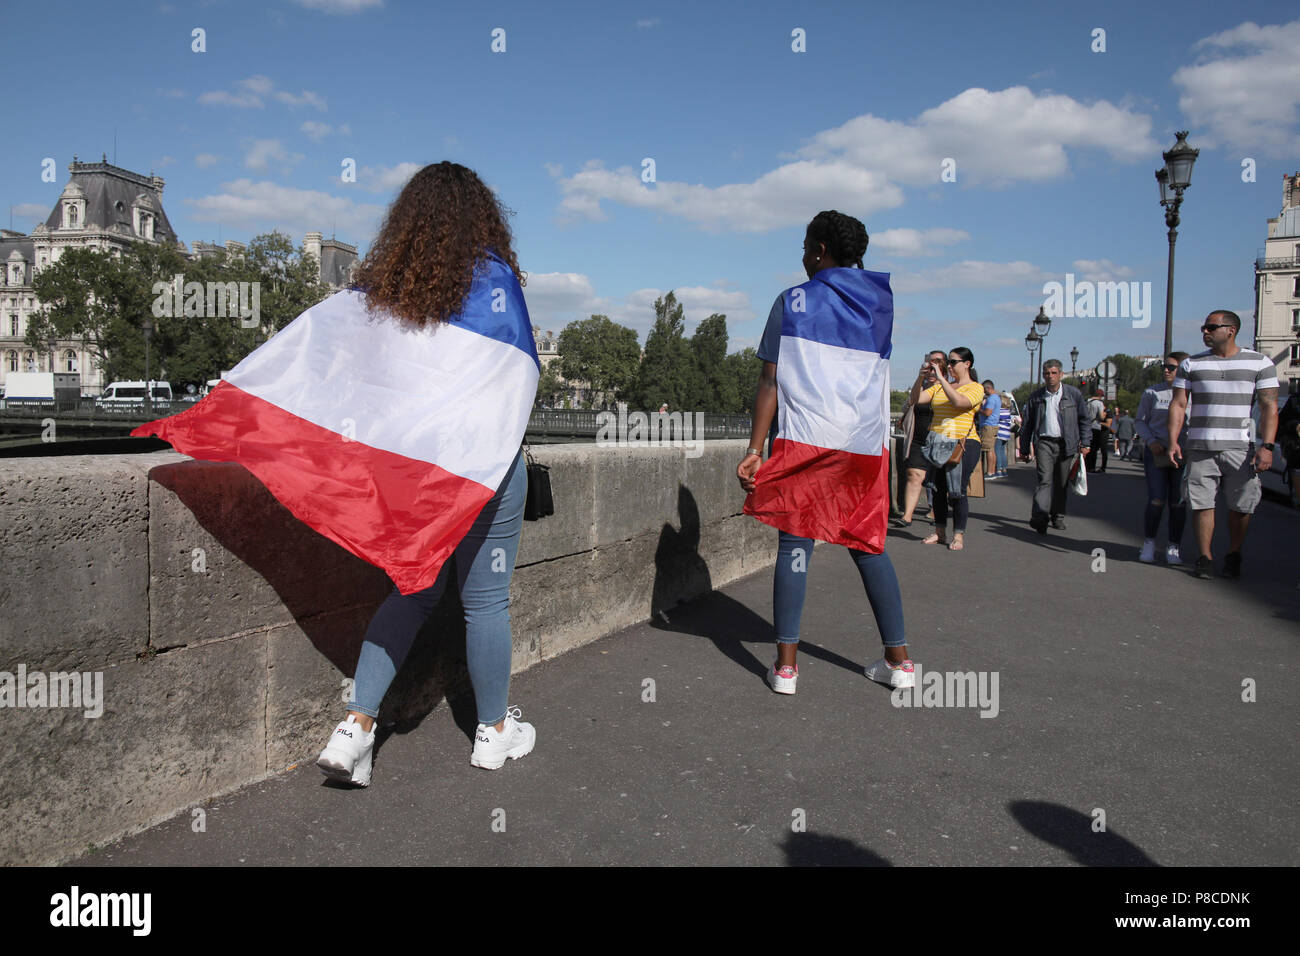 Paris, France. 10th July, 2018. FIFA World Cup 2018, semi-finals: France vs Belgium. Fans with French flags in front of the Paris City Hall on their way to the public viewing. France and Belgium are playing against each other in the first semi-finals match of the 2018 soccer World Cup in St. Petersburg. Credit: Leo Novel/dpa/Alamy Live News Stock Photo